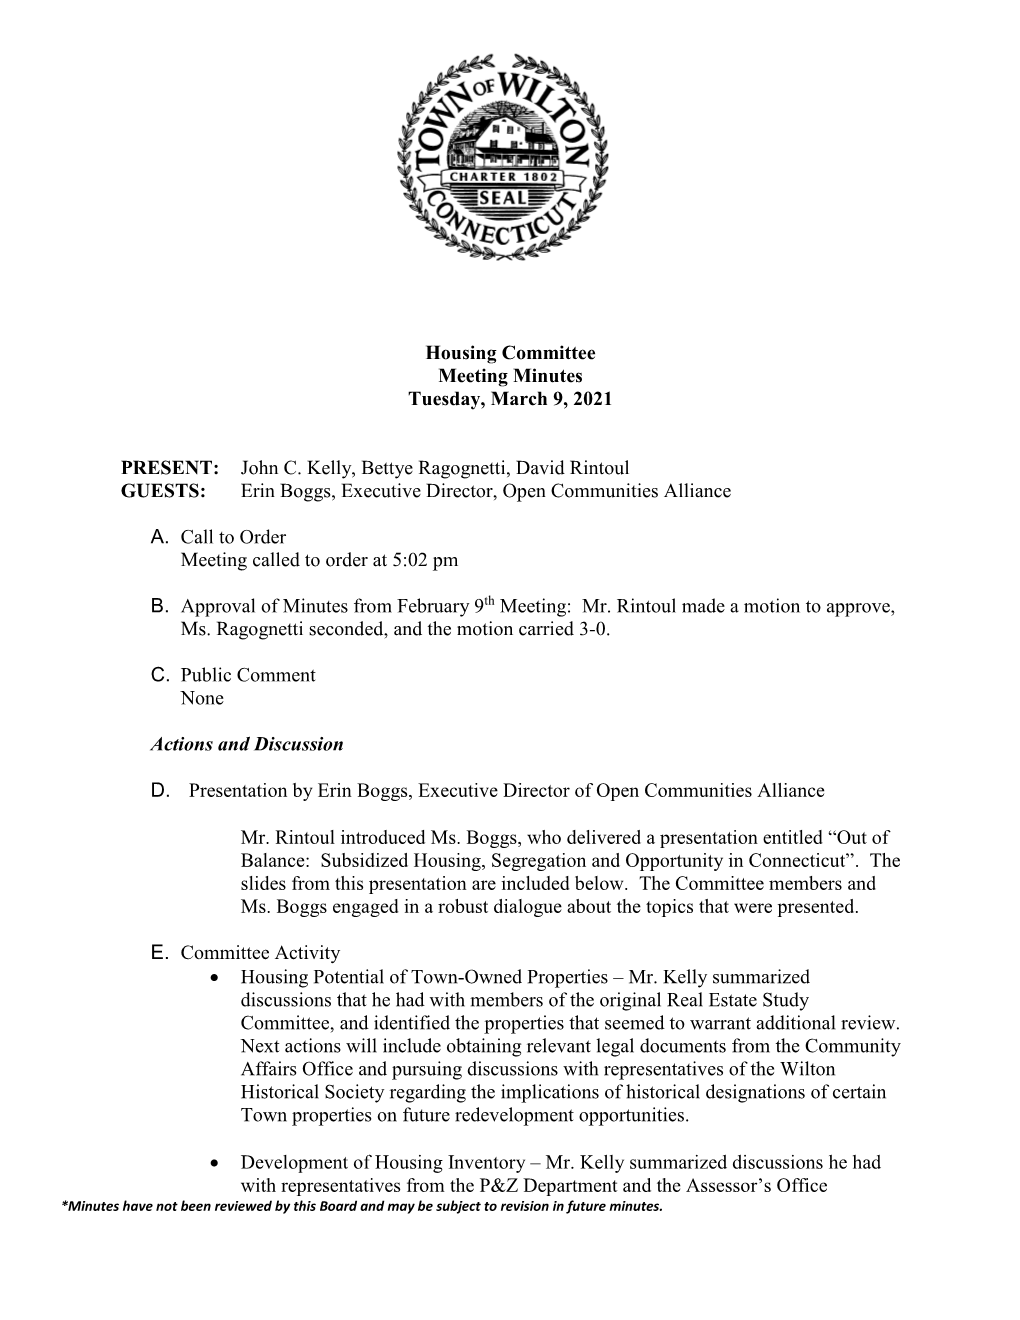 Housing Committee Meeting Minutes Tuesday, March 9, 2021